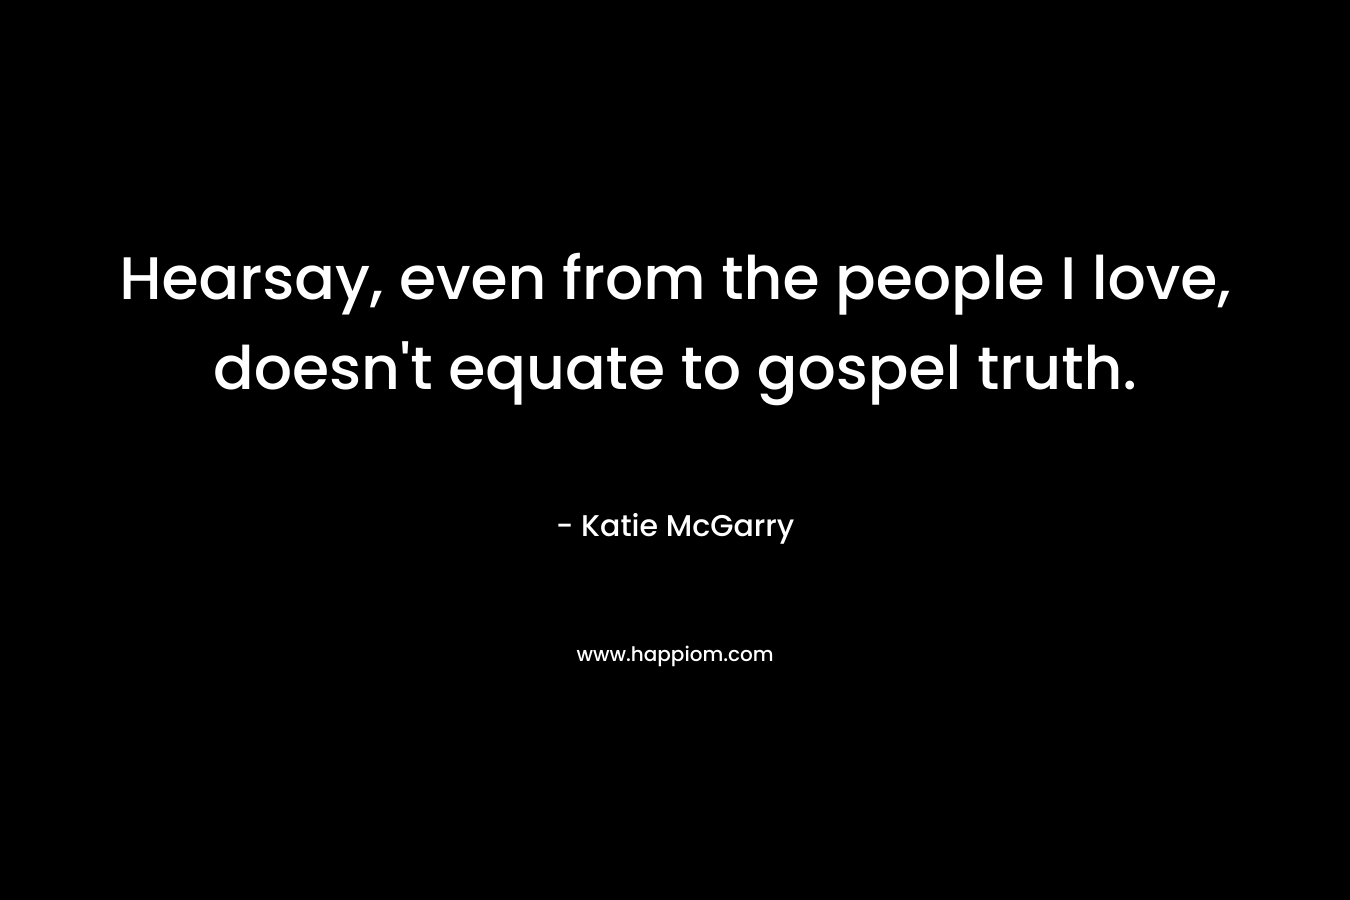 Hearsay, even from the people I love, doesn’t equate to gospel truth. – Katie McGarry